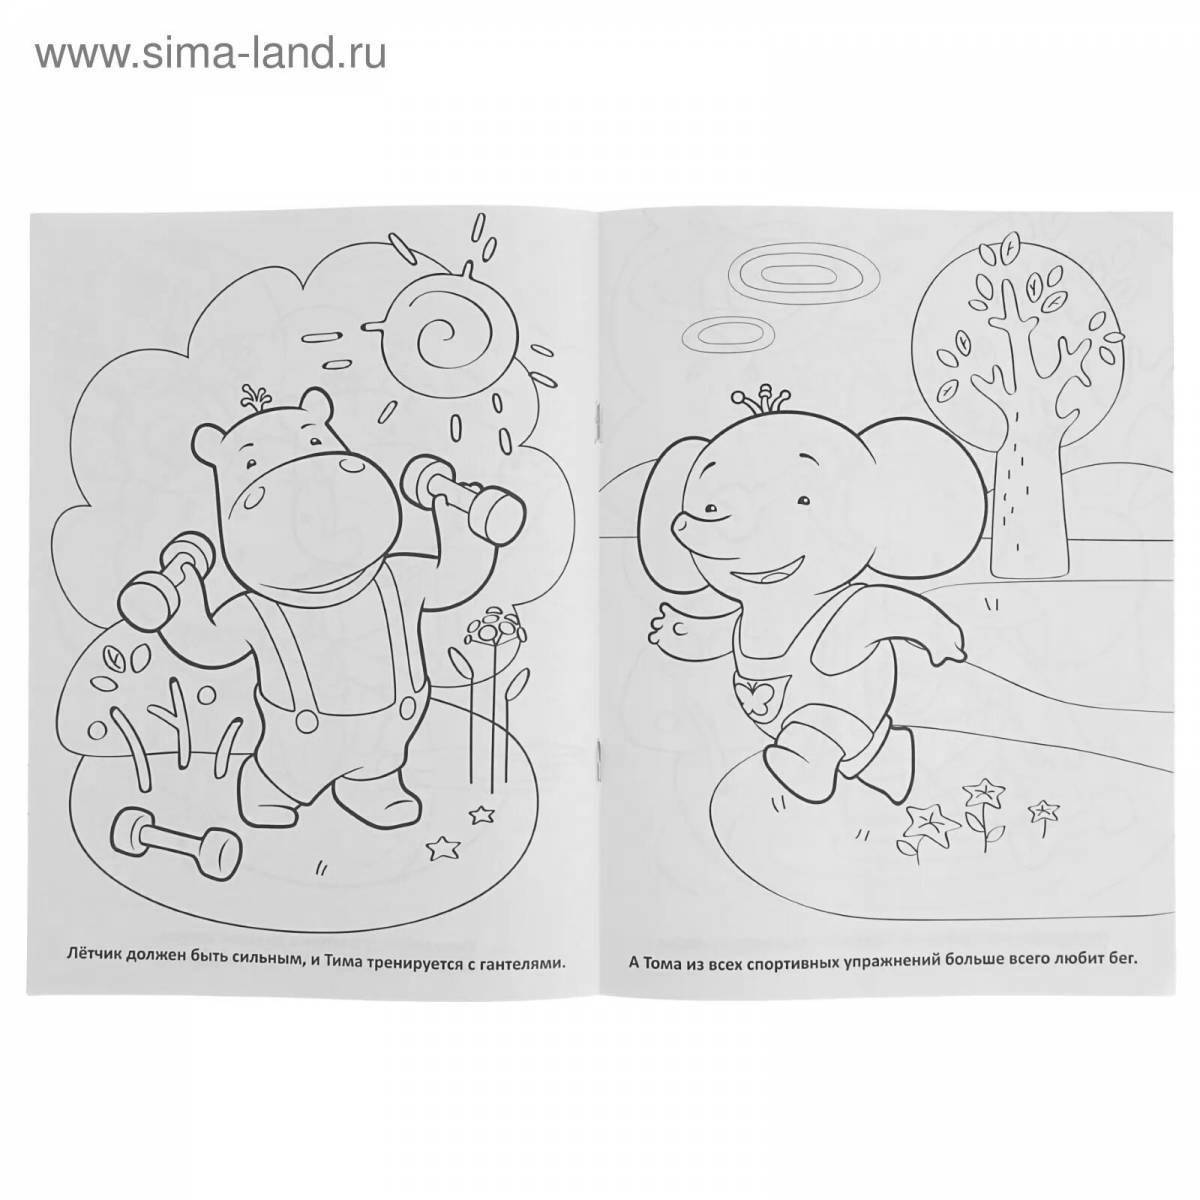 Outstanding tim tom coloring book for kids